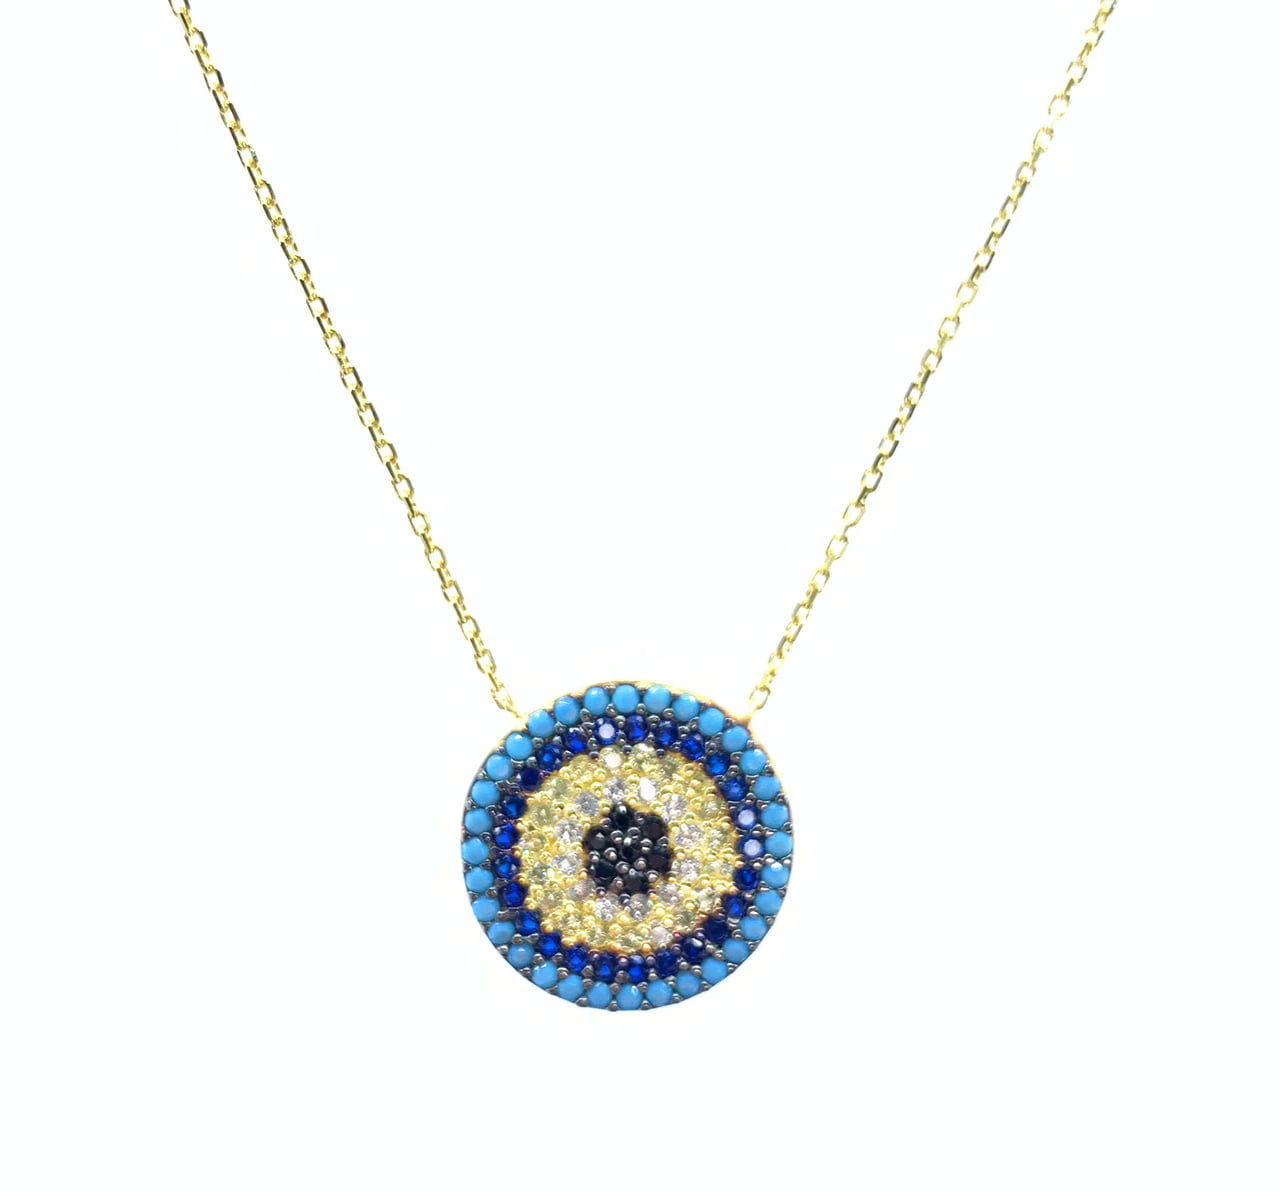 All in Stock - Multicolor CZ Round Evil Eye Necklace Gold-Toned Plated ...